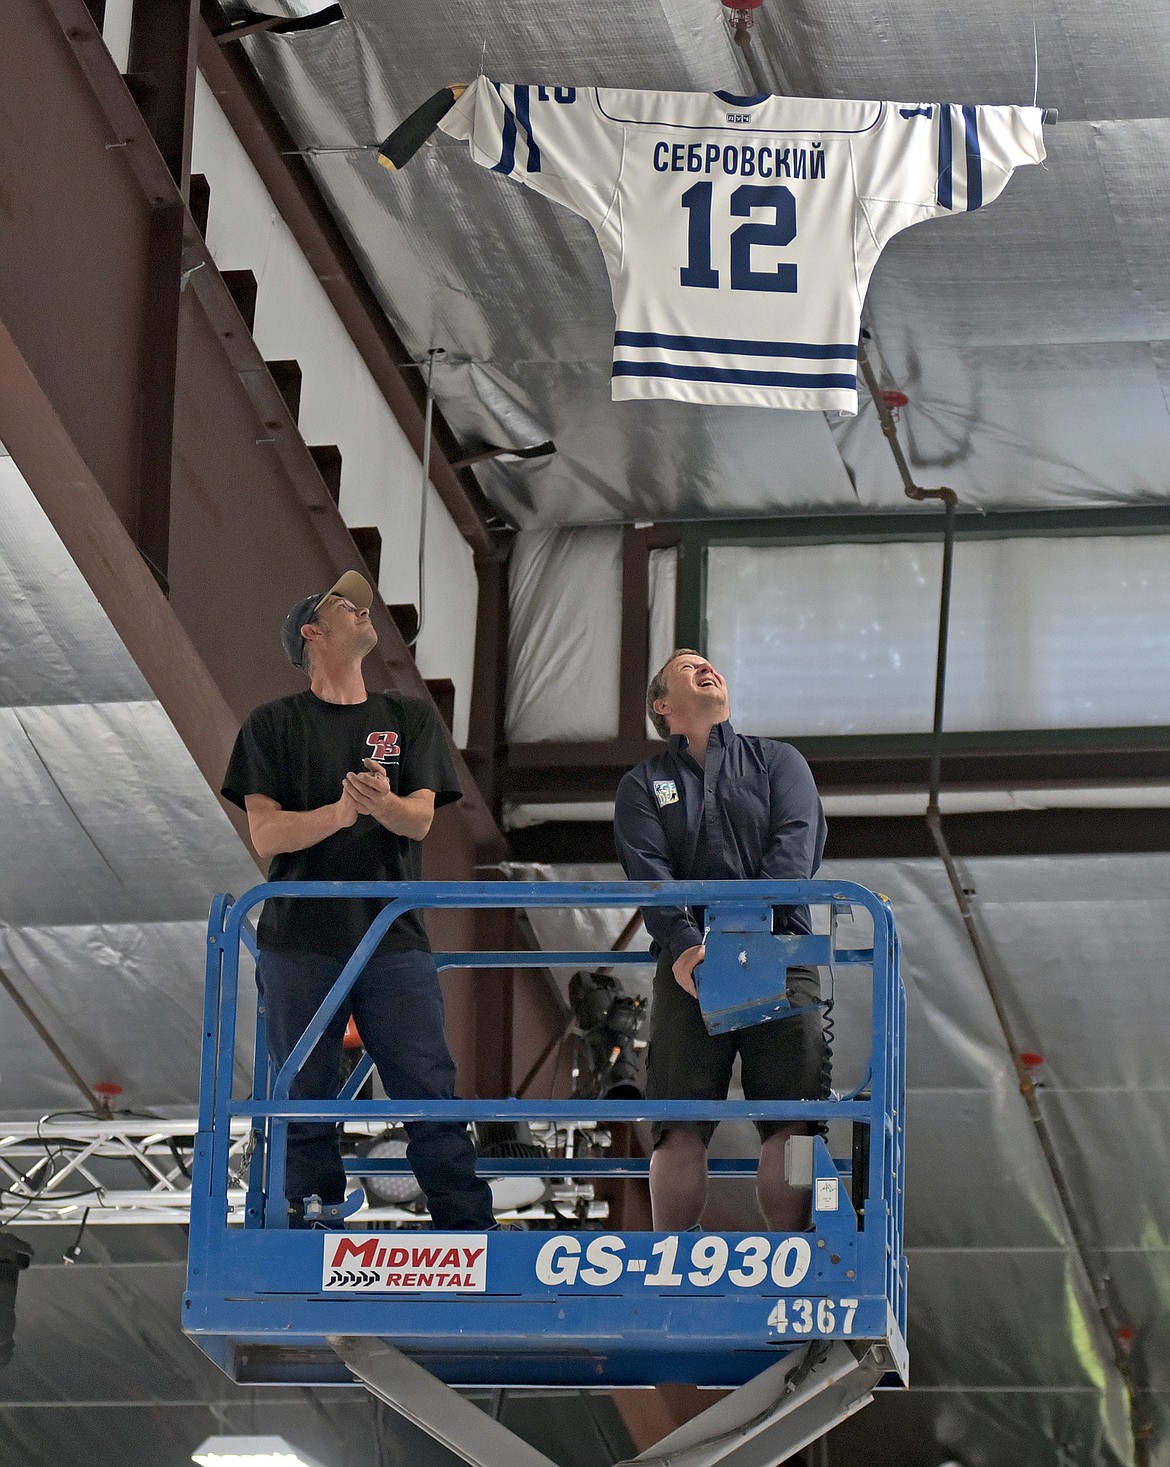 Stumptown Ice Den General Manager Greg Harms, right, and rink worker Mike Lenz, left, hang local hockey advocate Ken Sebrowsky's favorite jersey in the rafters of the ice rink on Thursday, Jun. 3. (Whitney England/Whitefish Pilot)